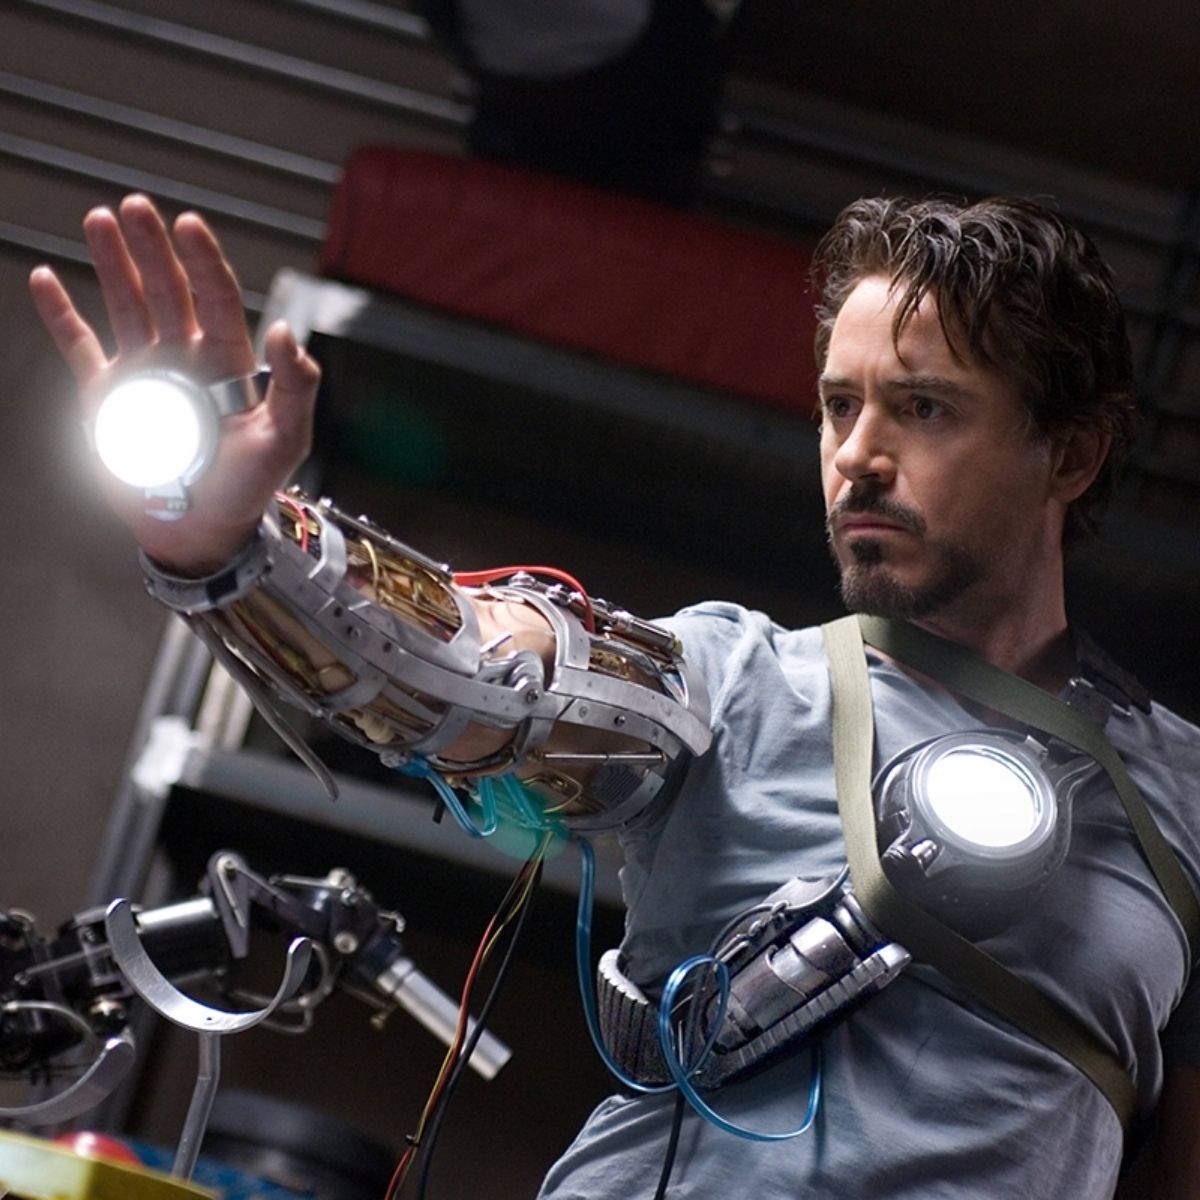 A still from the movie "Iron Man" (2008)